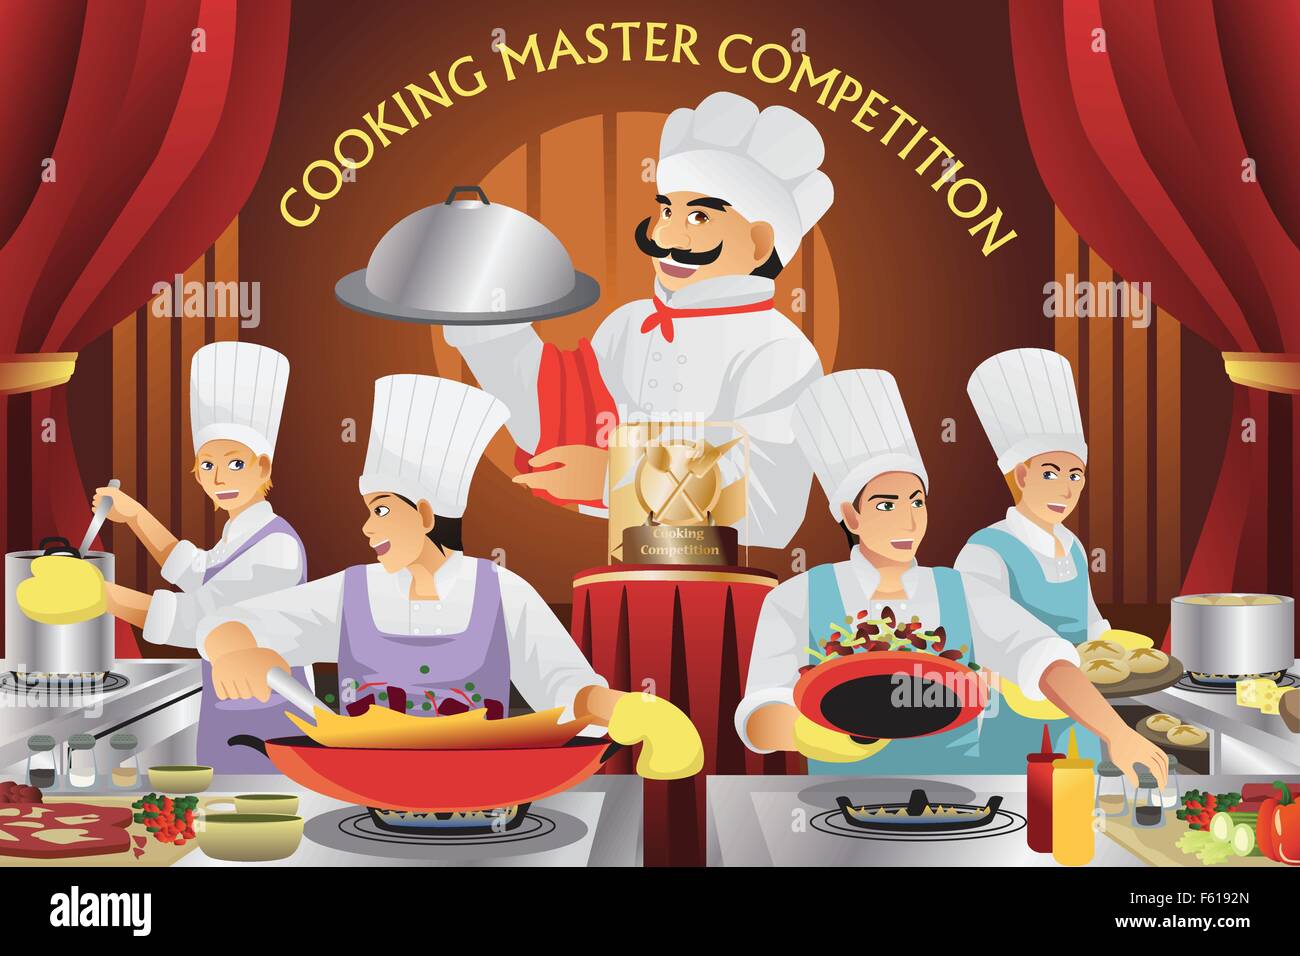 A vector illustration of cooking master competition Stock Vector